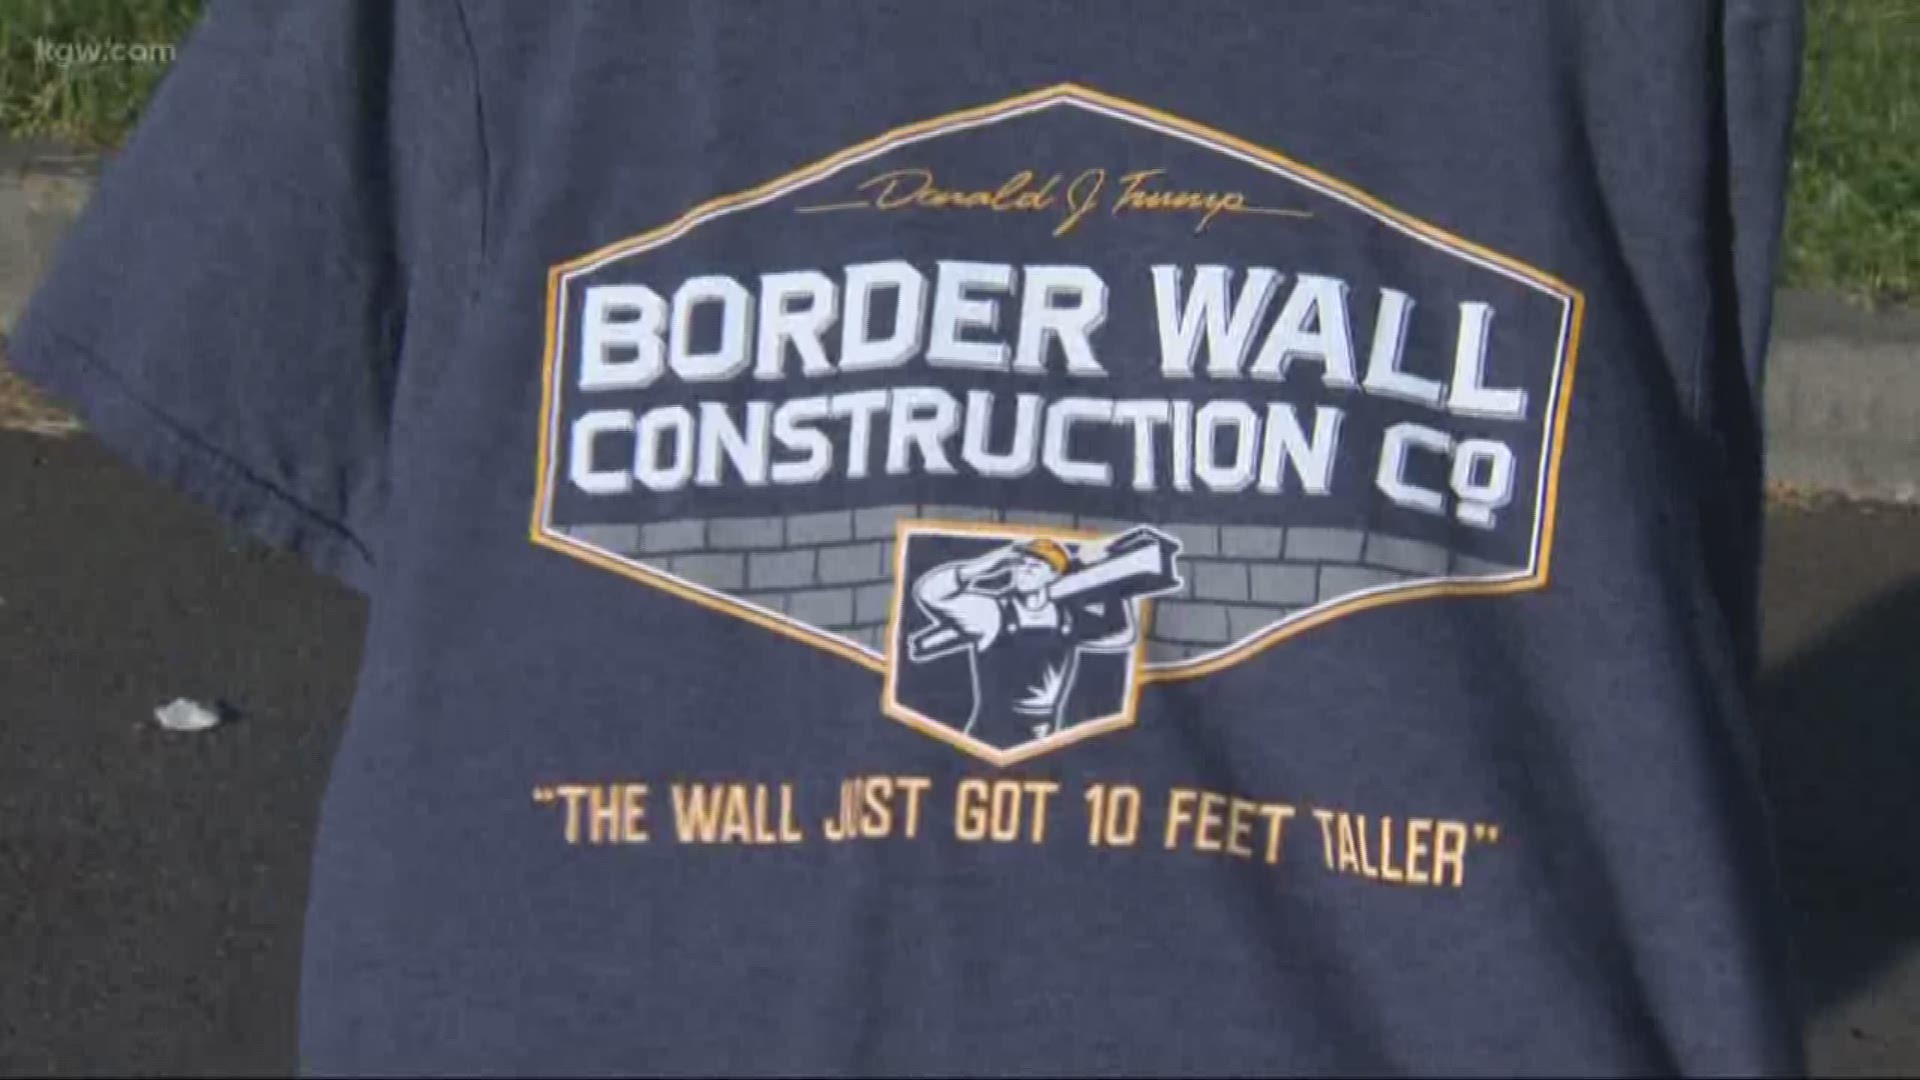 A student who wore a Border Wall T-shirt to school is suing the school for forcing him to cover it up.